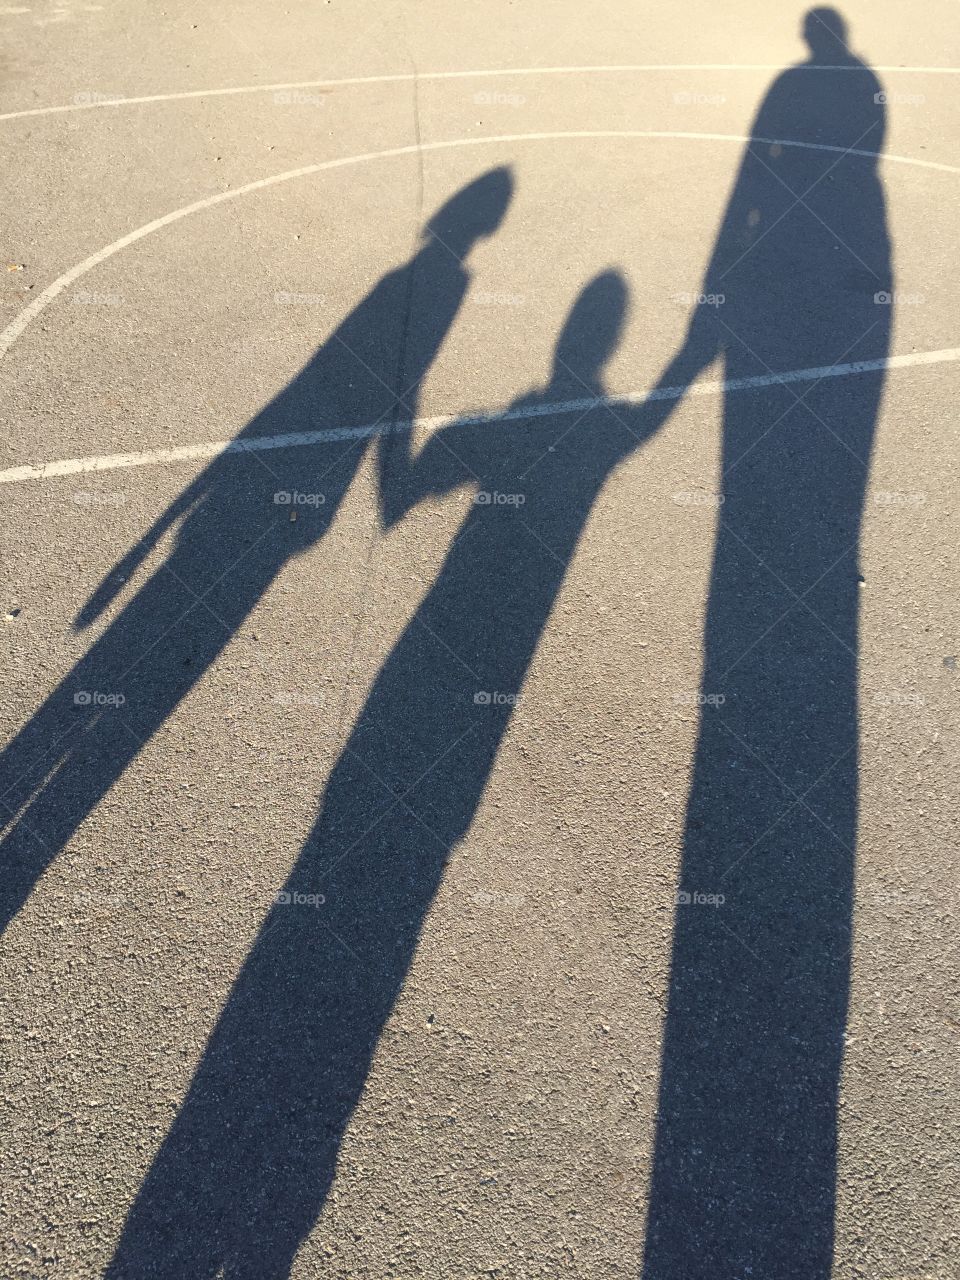 Shadow of people standing together